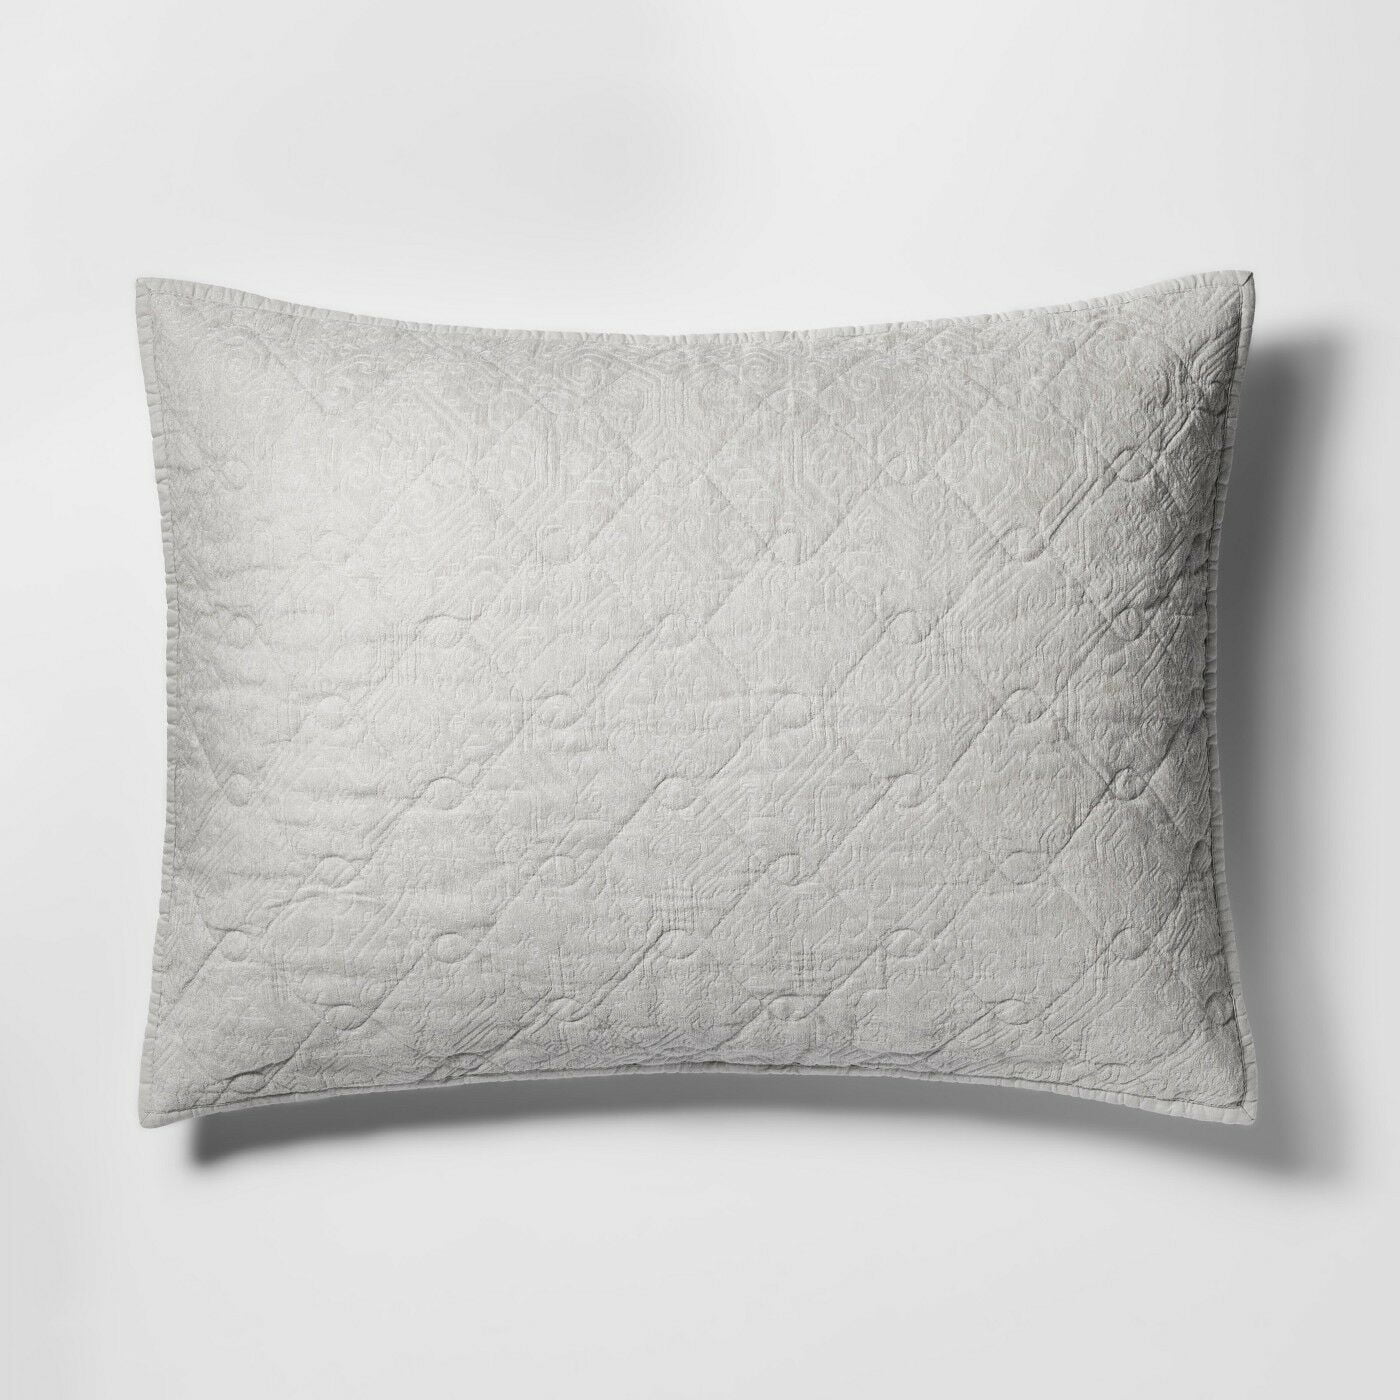 Inches Width Pillow Sham, White 